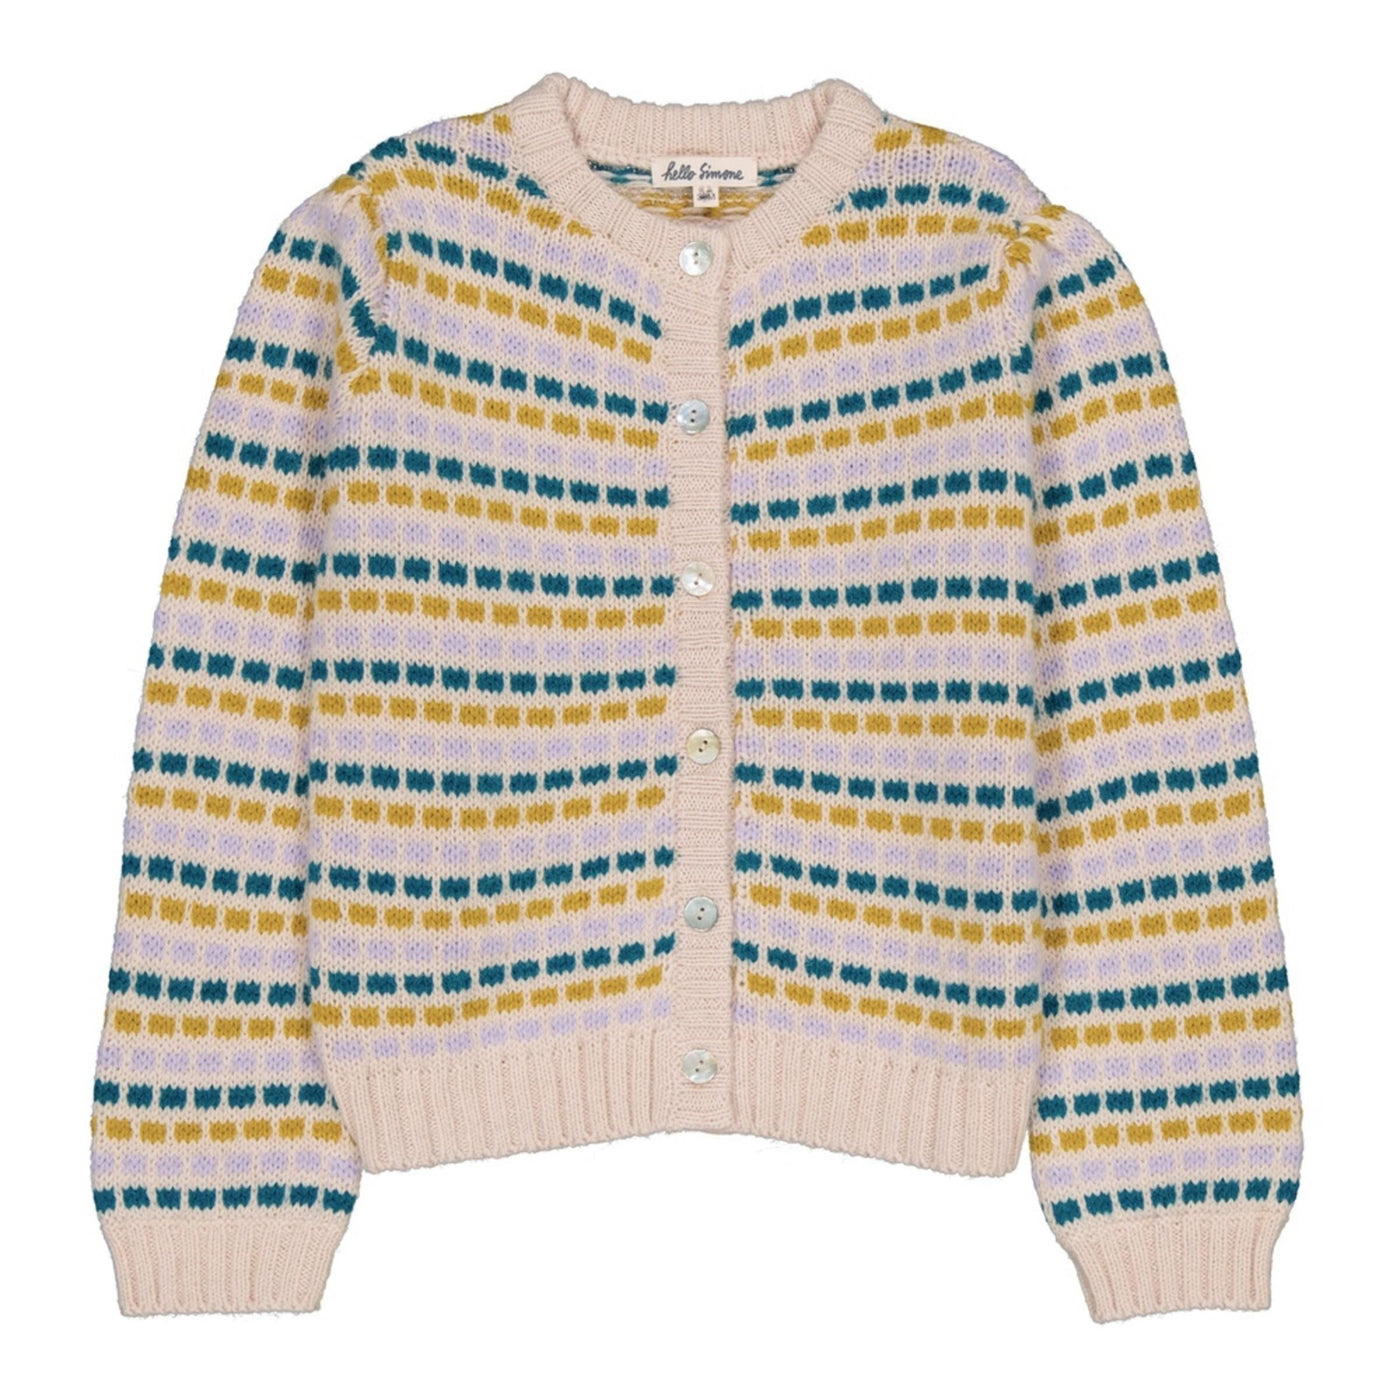 Josepha Parma Knitted Sweater